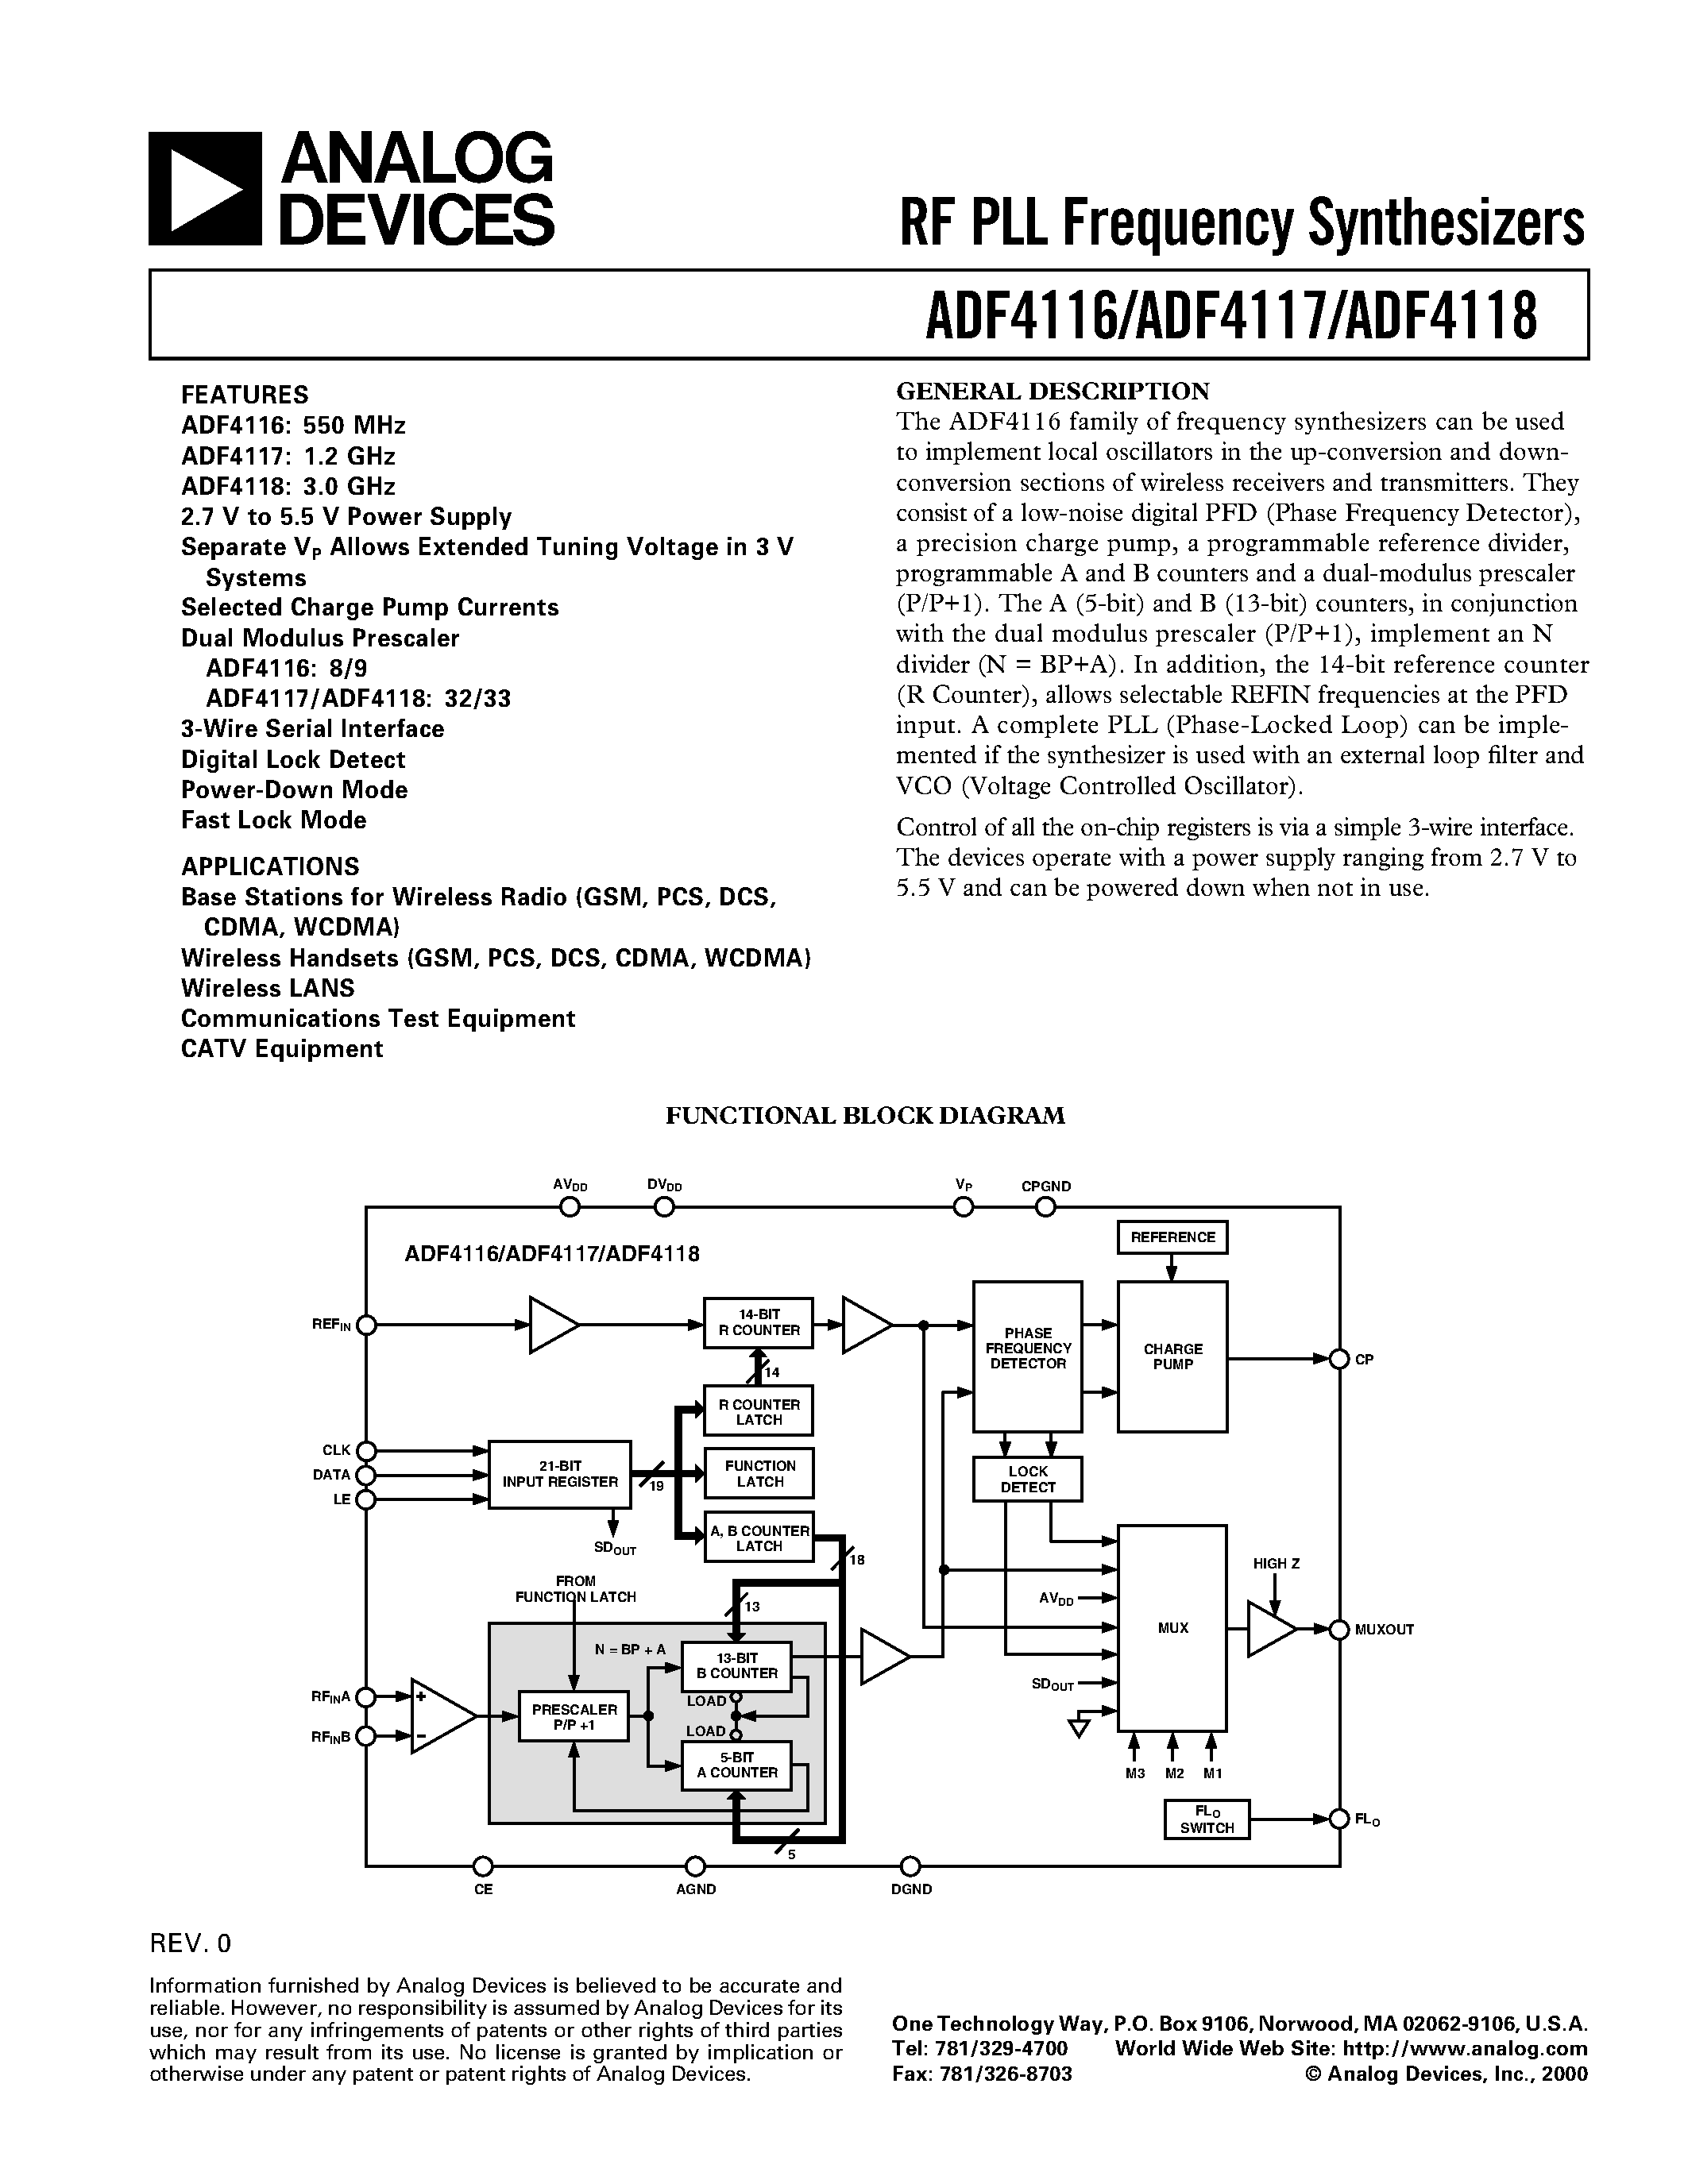 Datasheet ADF4117BRU - RF PLL Frequency Synthesizers page 1